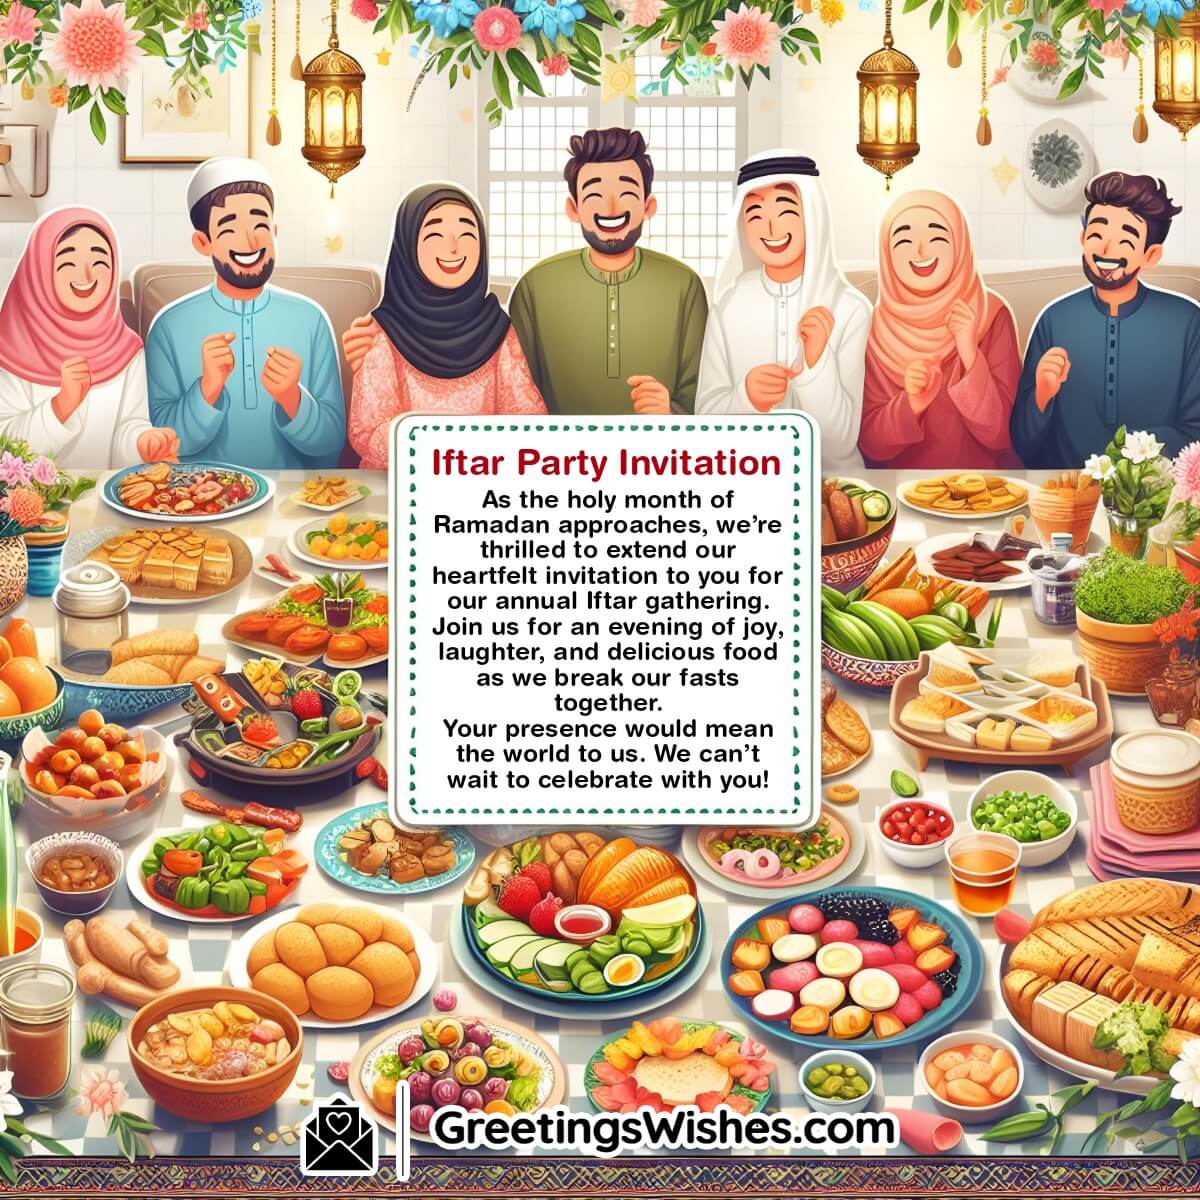 Iftar Party Invitations For Relatives And Friends